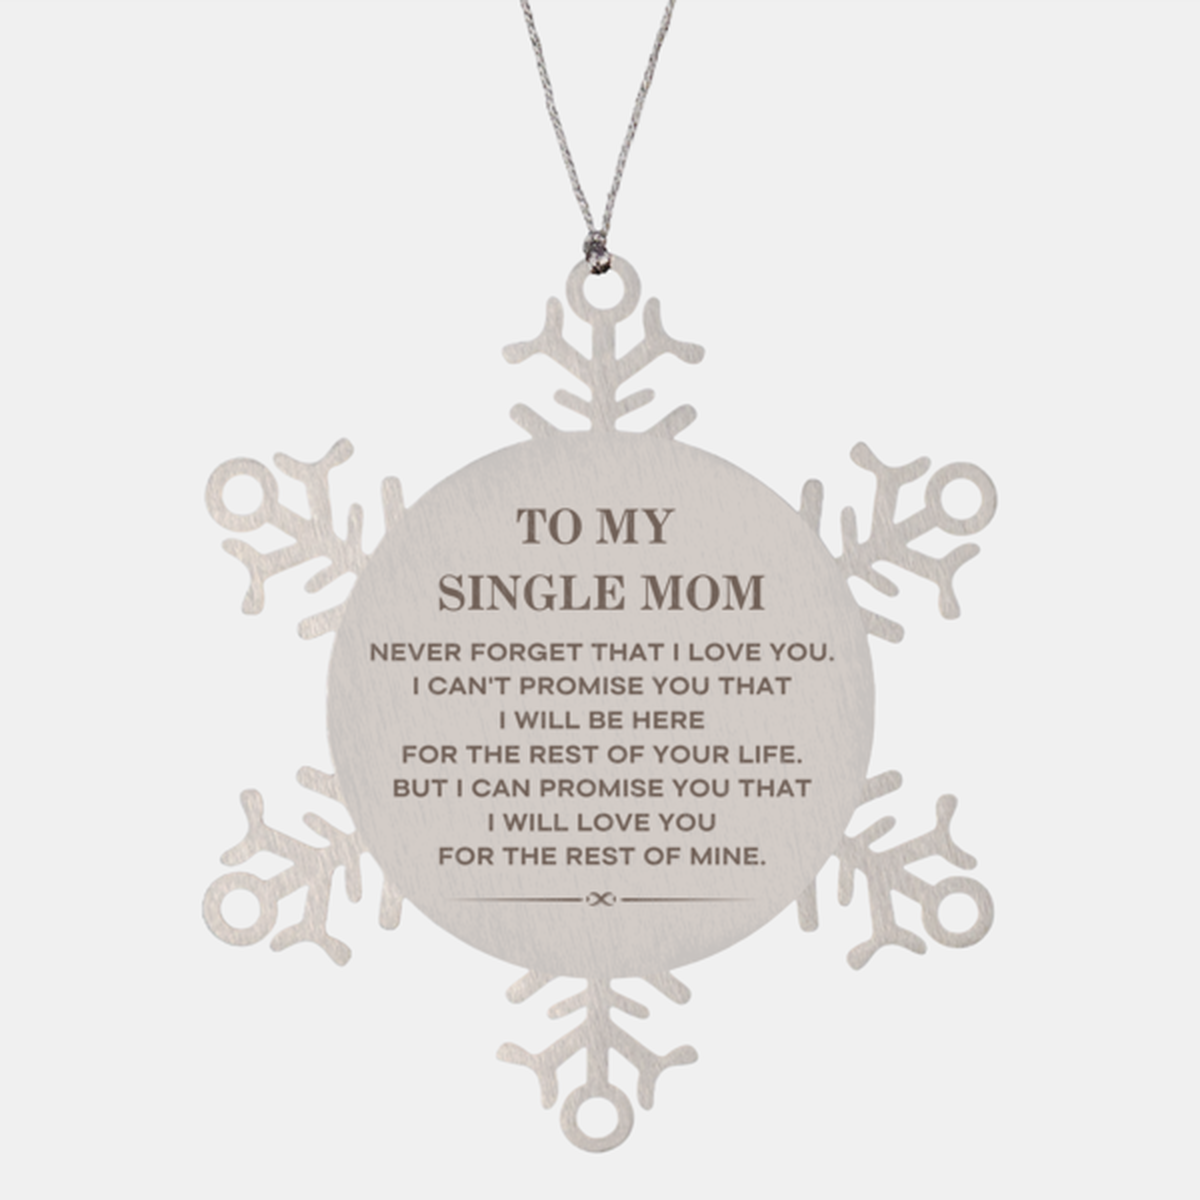 To My Single Mom Gifts, I will love you for the rest of mine, Love Single Mom Ornament, Birthday Christmas Unique Snowflake Ornament For Single Mom